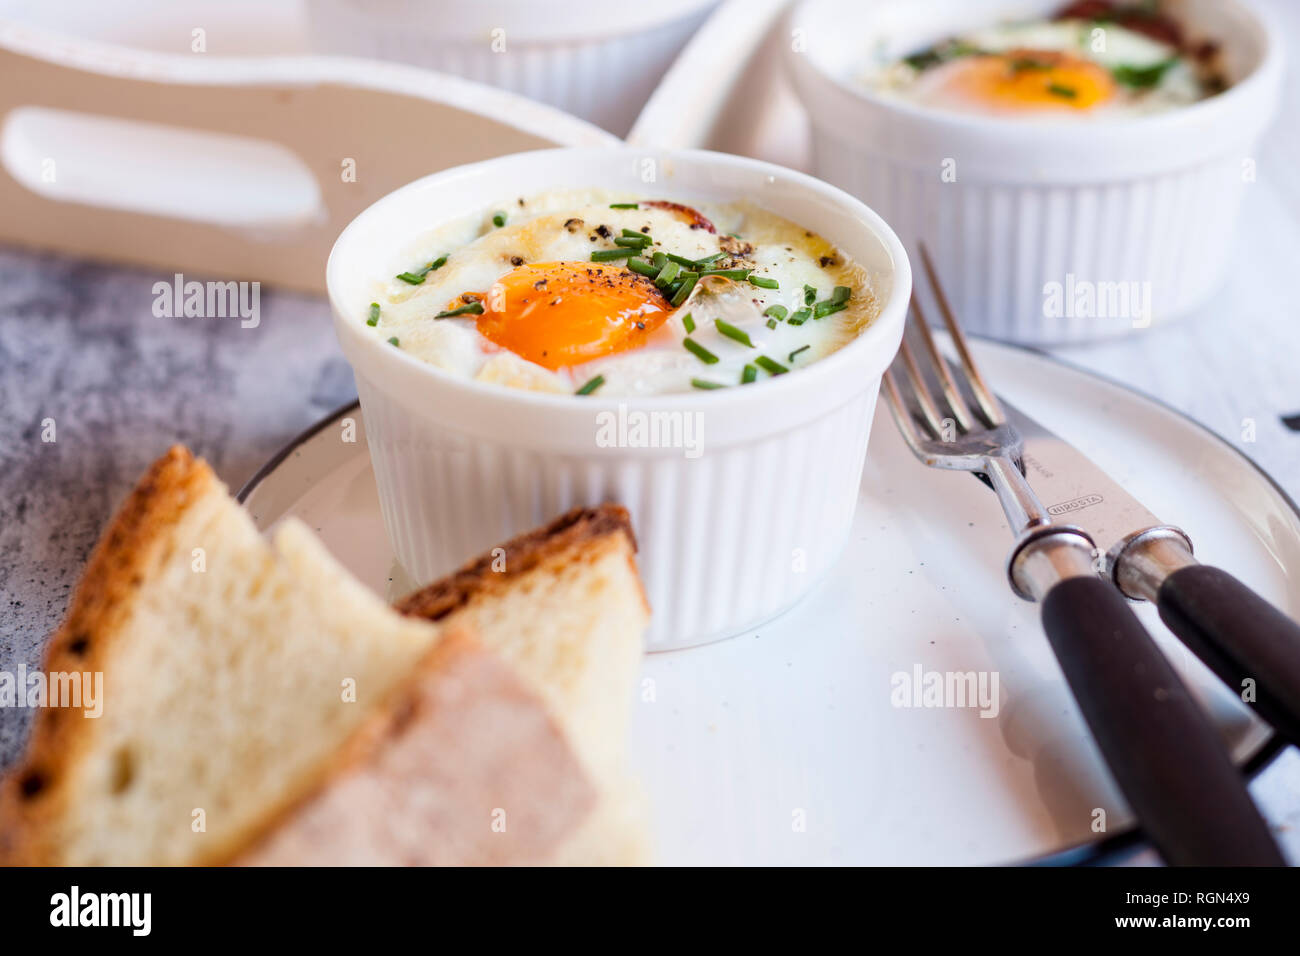 Oefs en cocotte (Individual baked eggs) with spinach, feta, bacon, eggs, and slices of bread Stock Photo